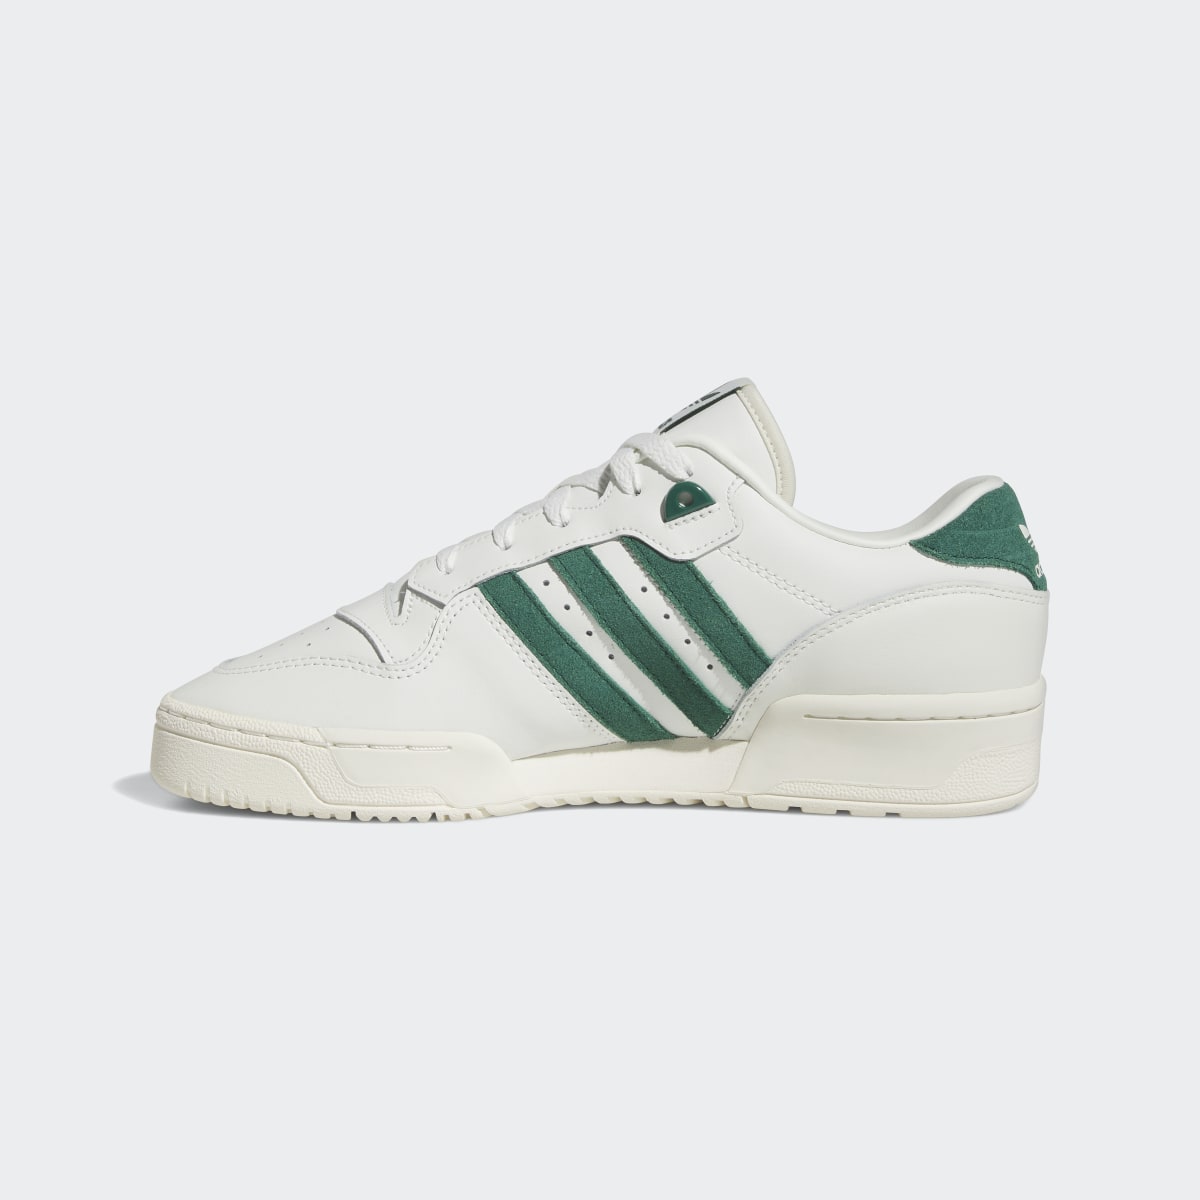 Adidas Rivalry Low Shoes. 7